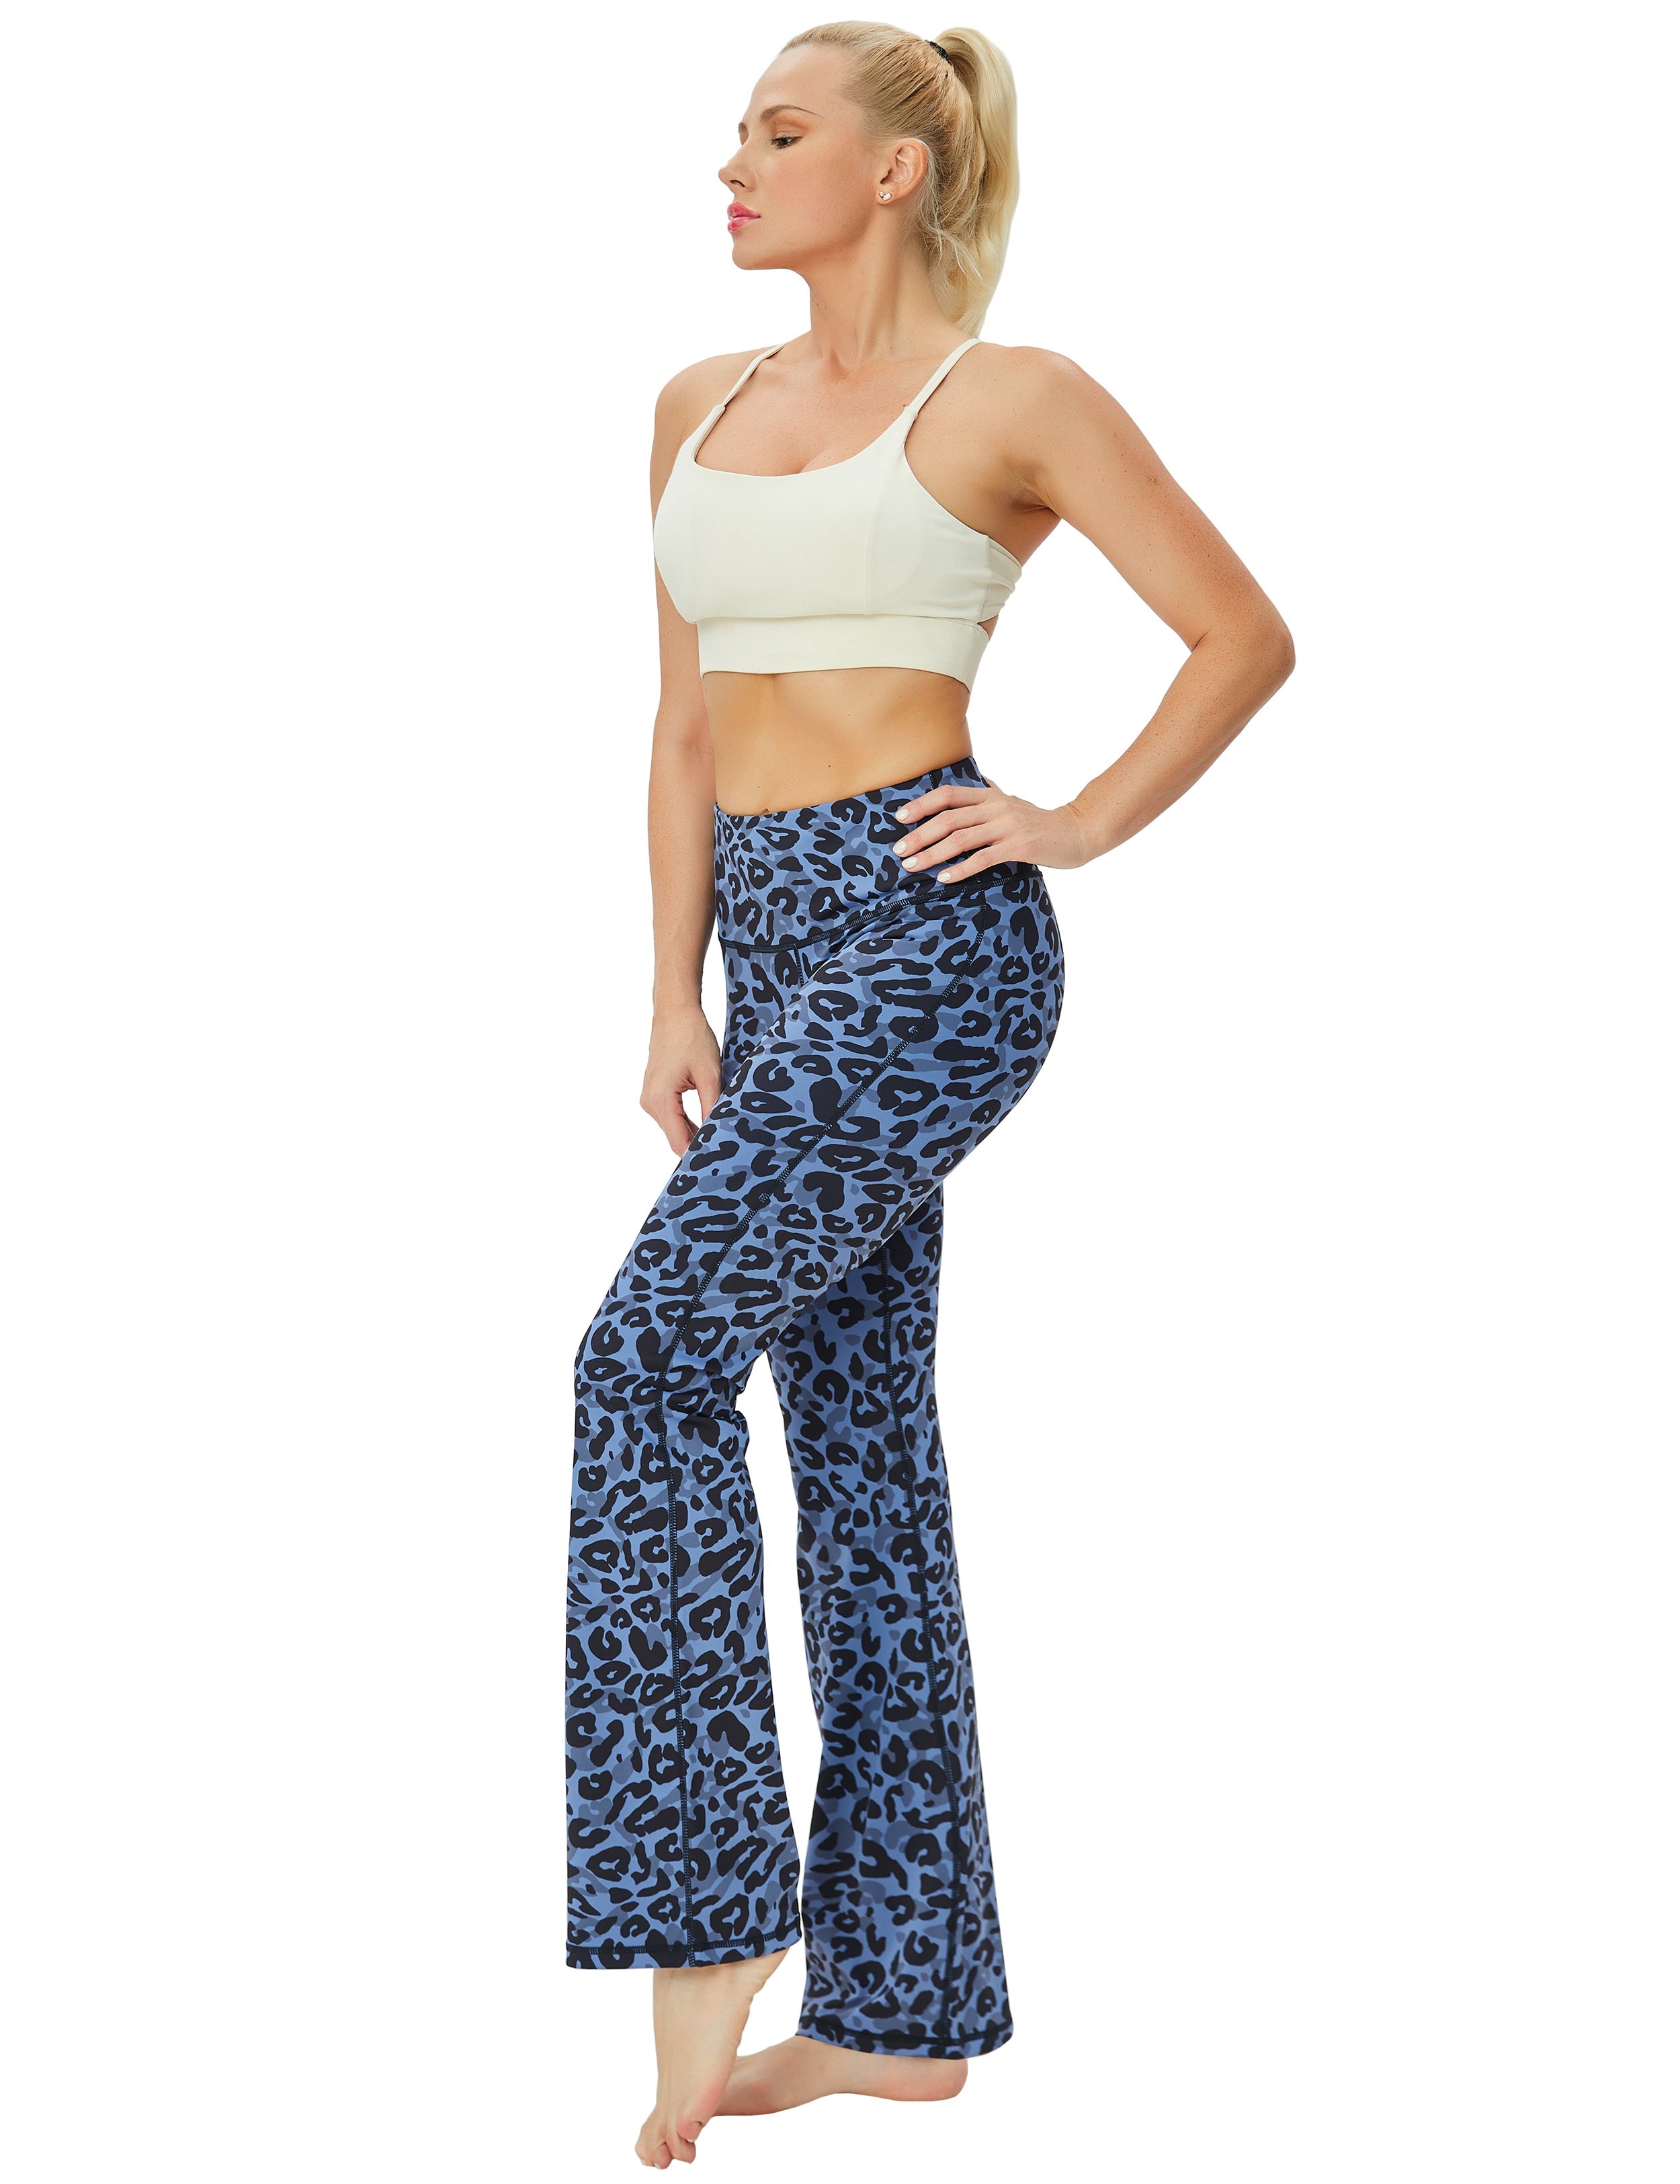 High Waist Printed Bootcut Leggings navy_leopard 78%Polyester/22%Spandex Fabric doesn't attract lint easily 4-way stretch No see-through Moisture-wicking Tummy control Inner pocket Five lengths